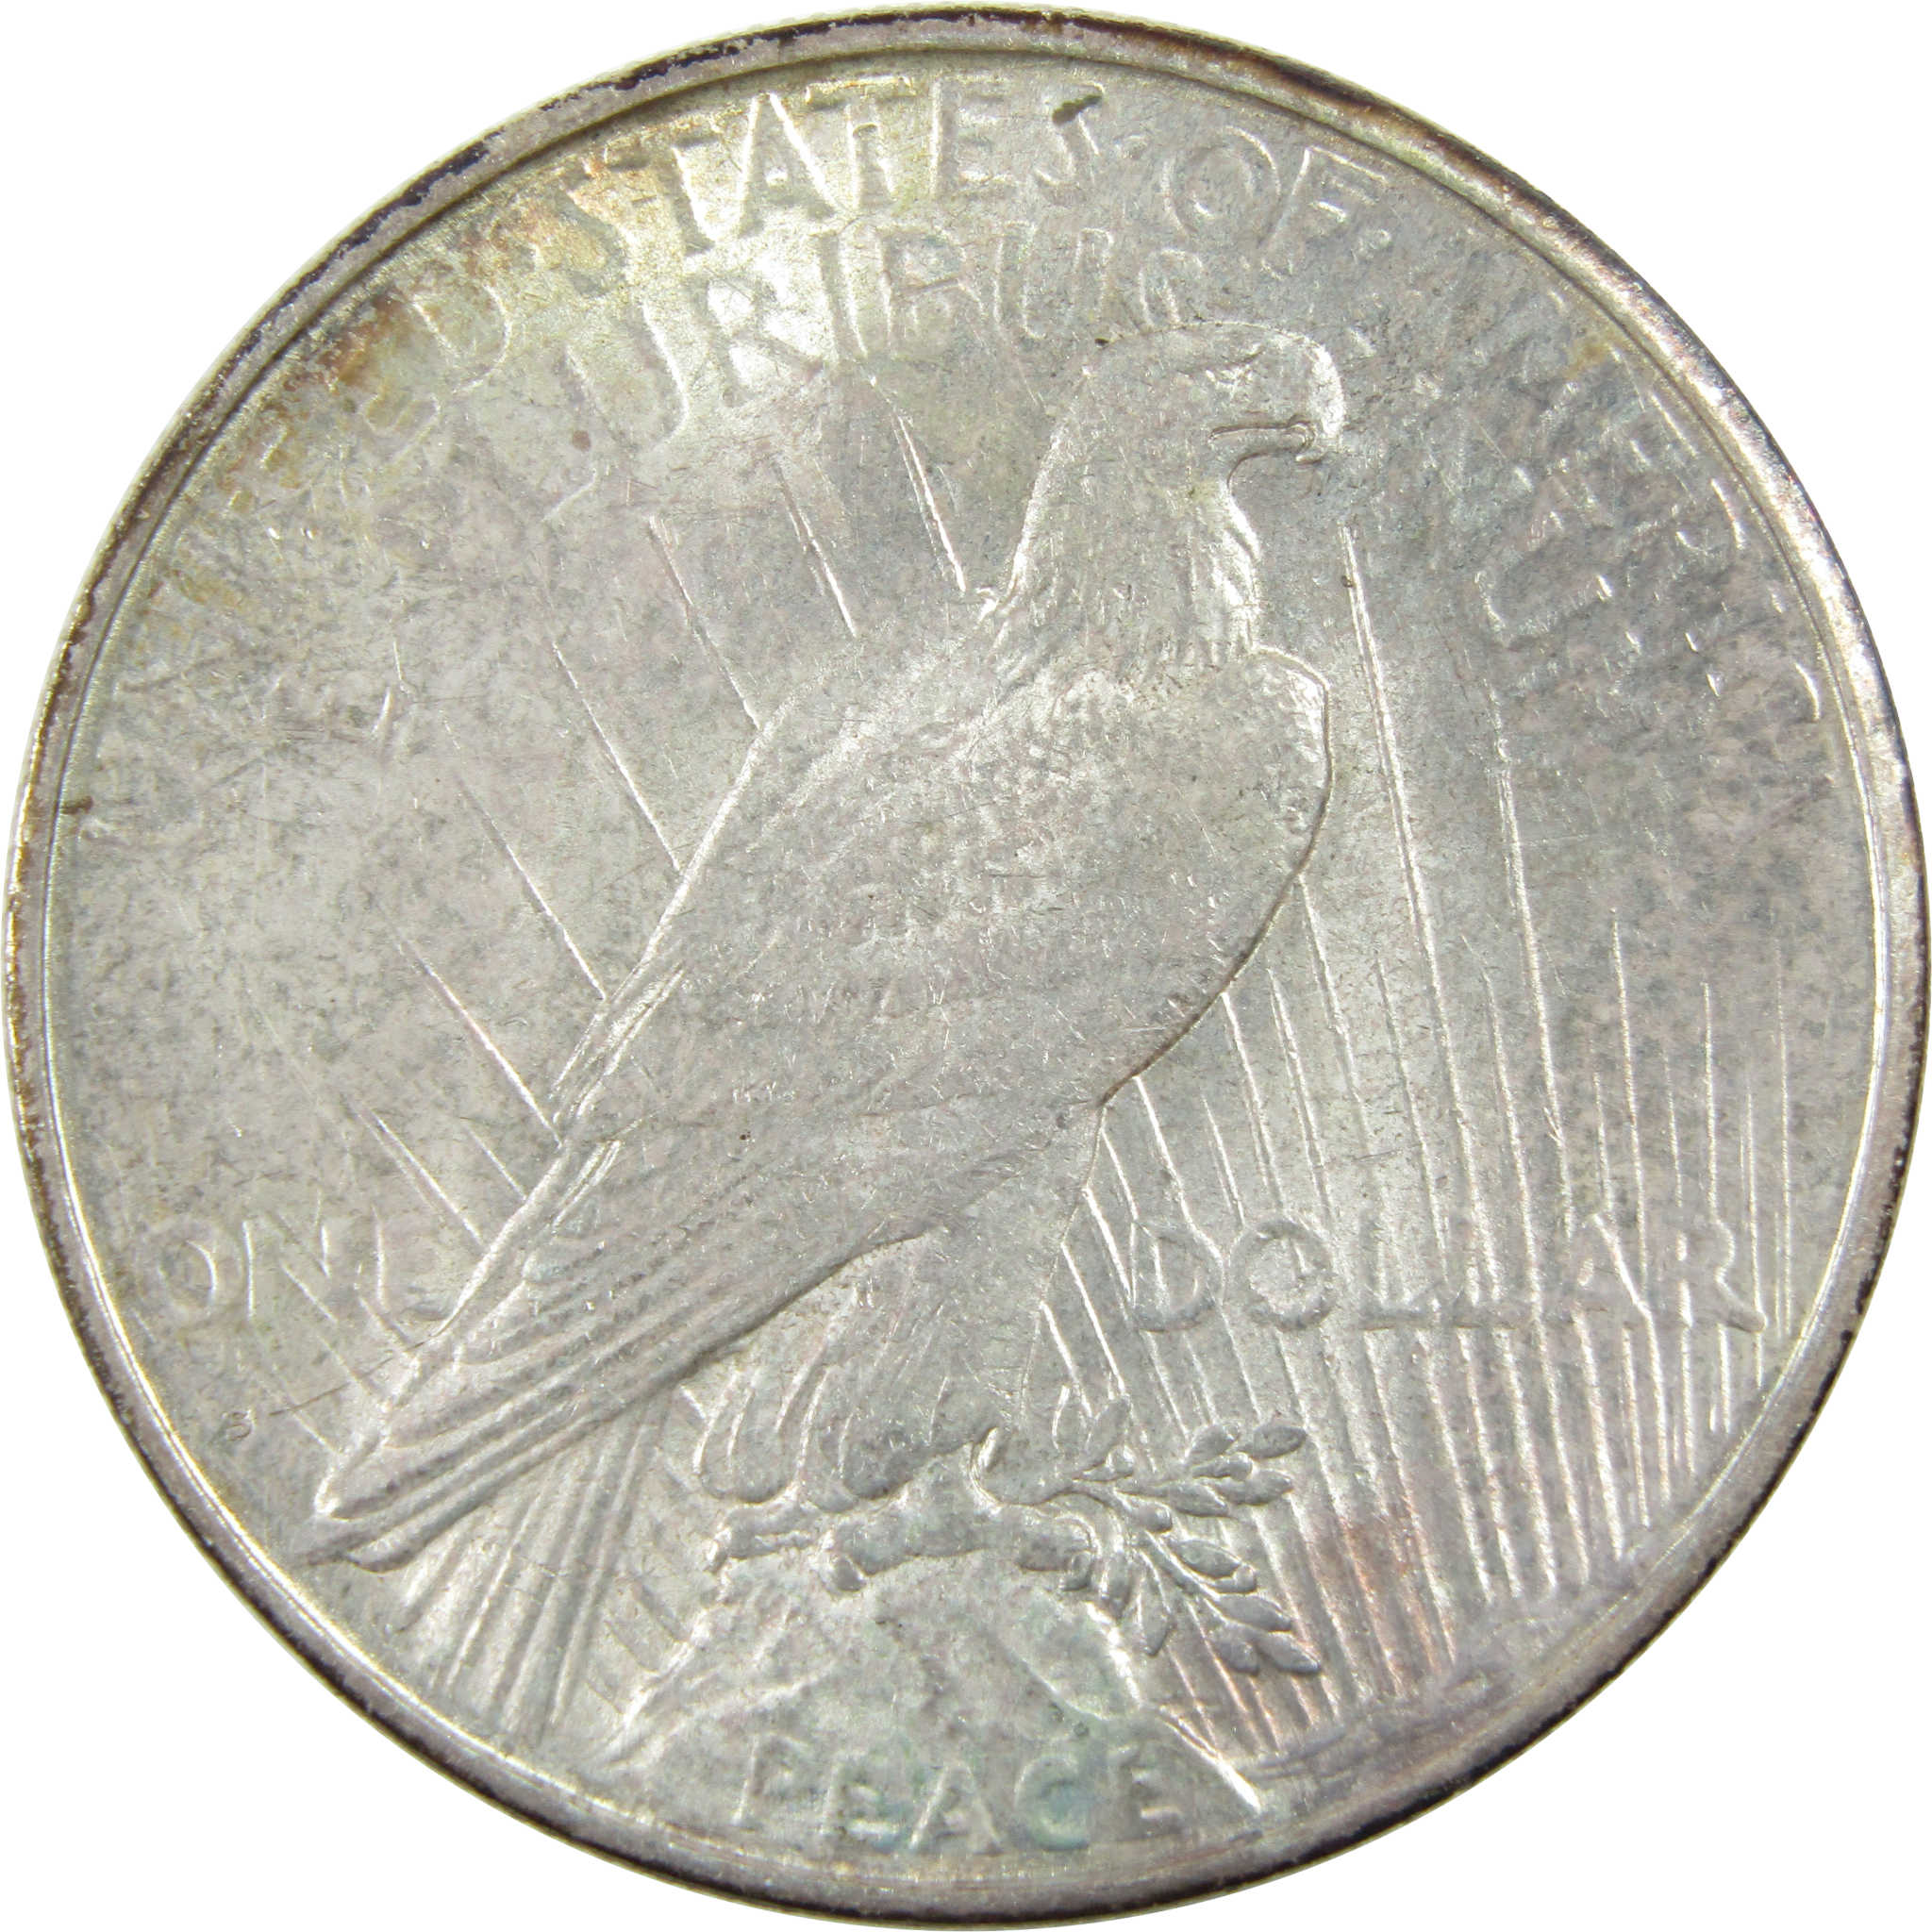 1925 S Peace Dollar AU About Uncirculated Silver $1 Coin SKU:I13378